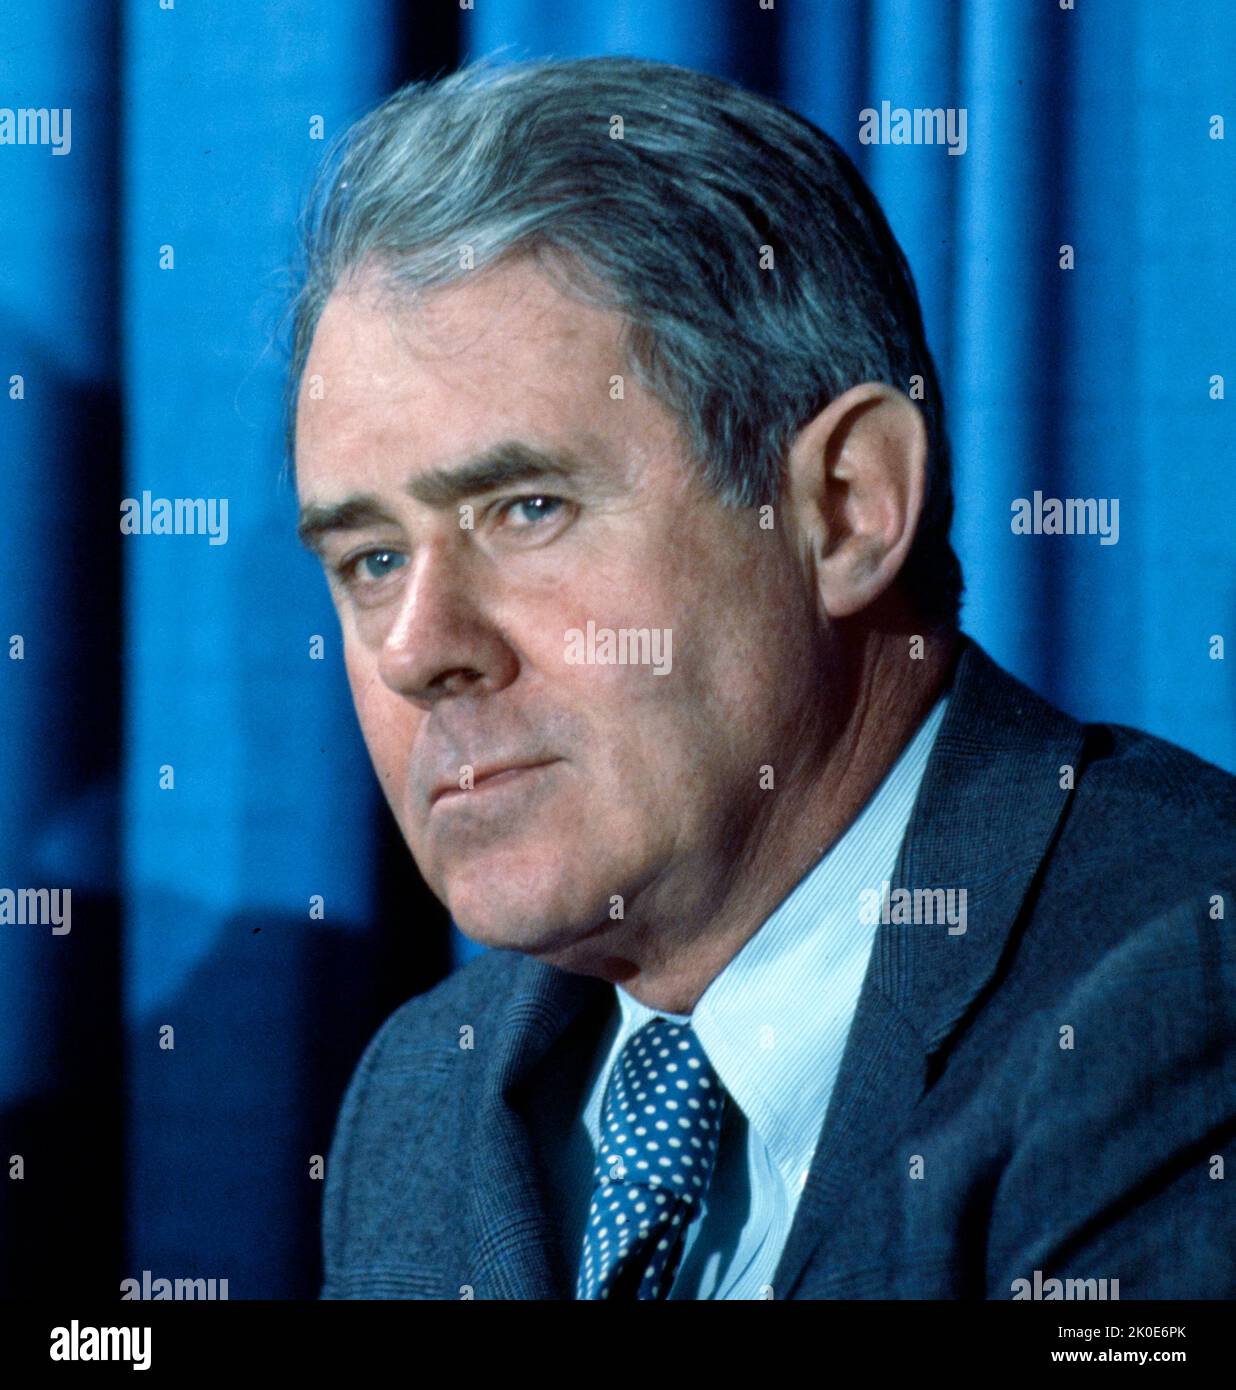 Cyrus Roberts Vance Sr. (March 27, 1917 - January 12, 2002) was an American lawyer and United States Secretary of State under President Jimmy Carter from 1977 to 1980. Stock Photo